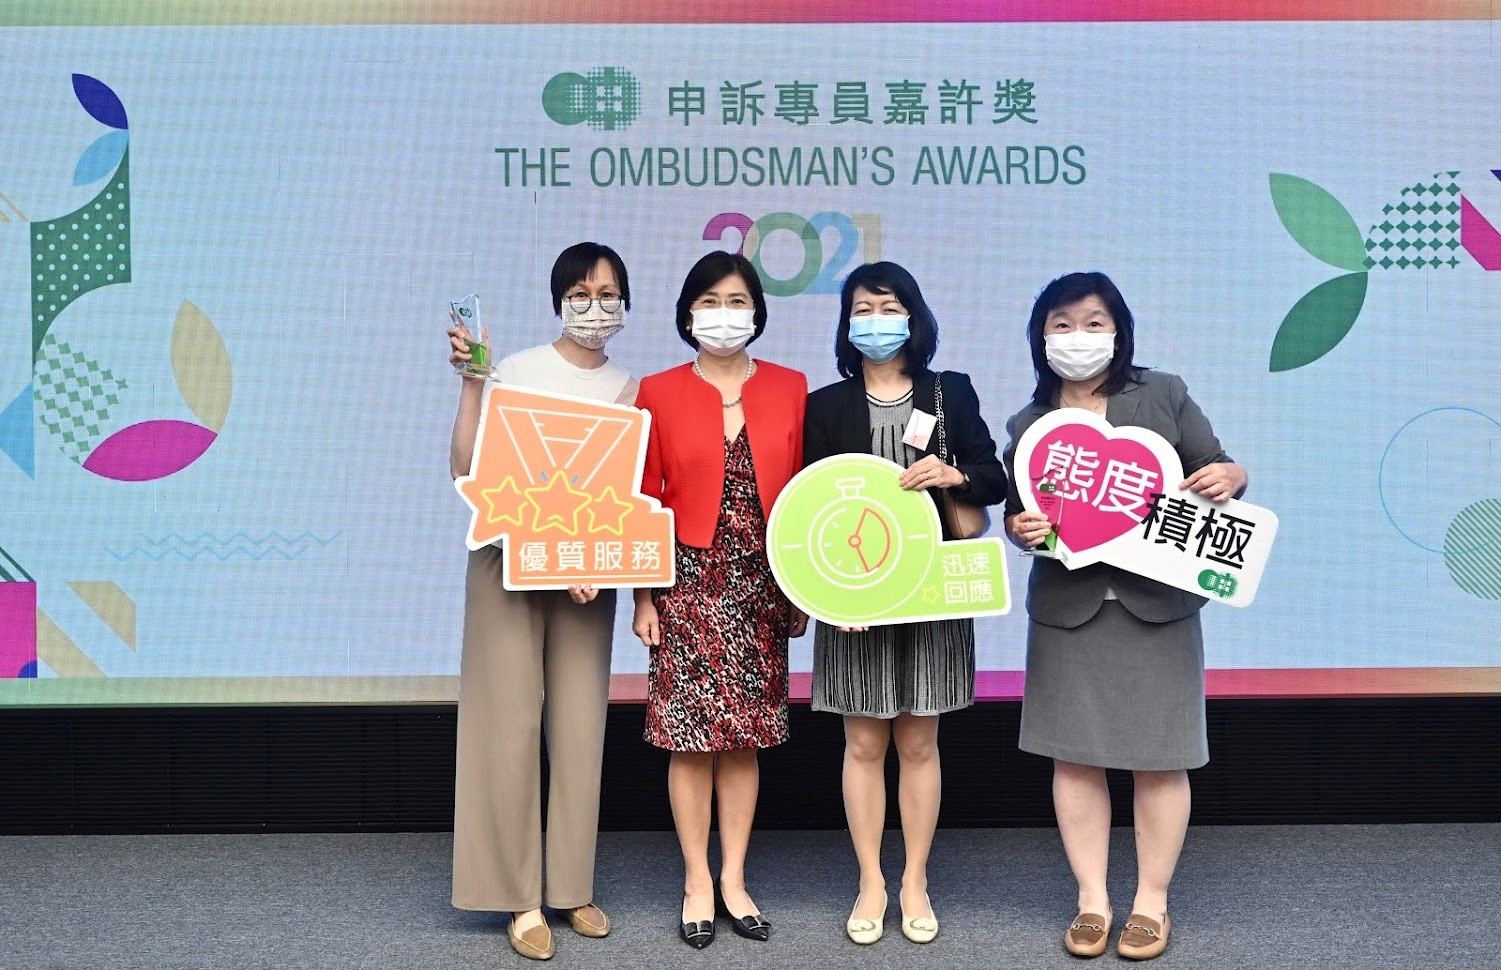 The Ombudsman, Ms Winnie Chiu (second left) and the Land Registrar, Ms Joyce TAM, JP (second right) taking photo with the awardees of The Ombudsman's Awards for Officers of Public Organisations, Ms POON Lai-chun, Christine, Land Registration Officer I, and Ms LEE Mei-wai, Margaret, Senior Clerical Officer, of the Land Registry